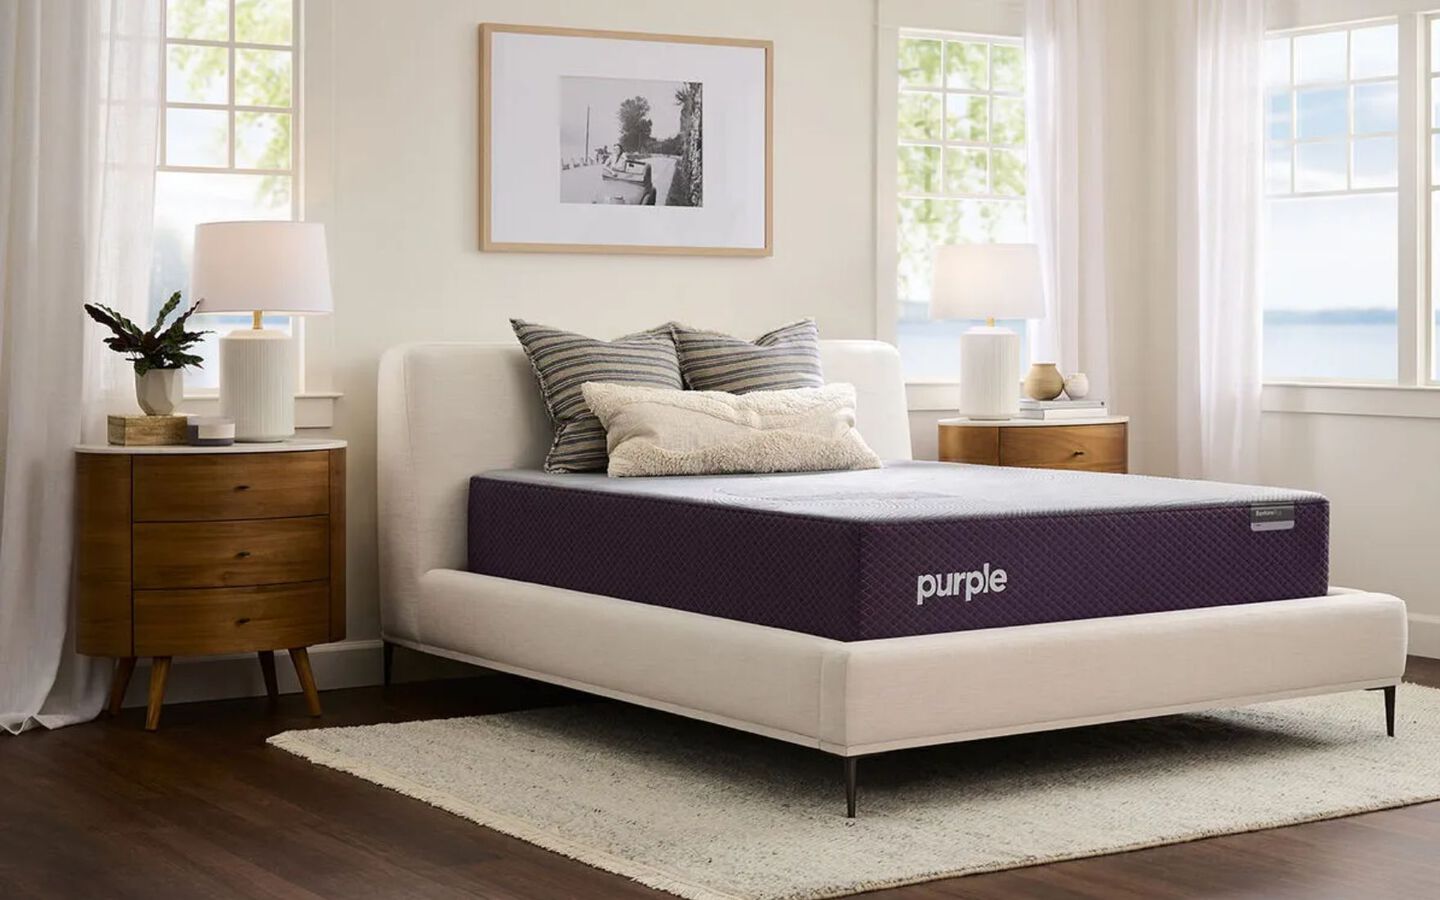 Purple mattress in a bedroom with two nightstands and open windows